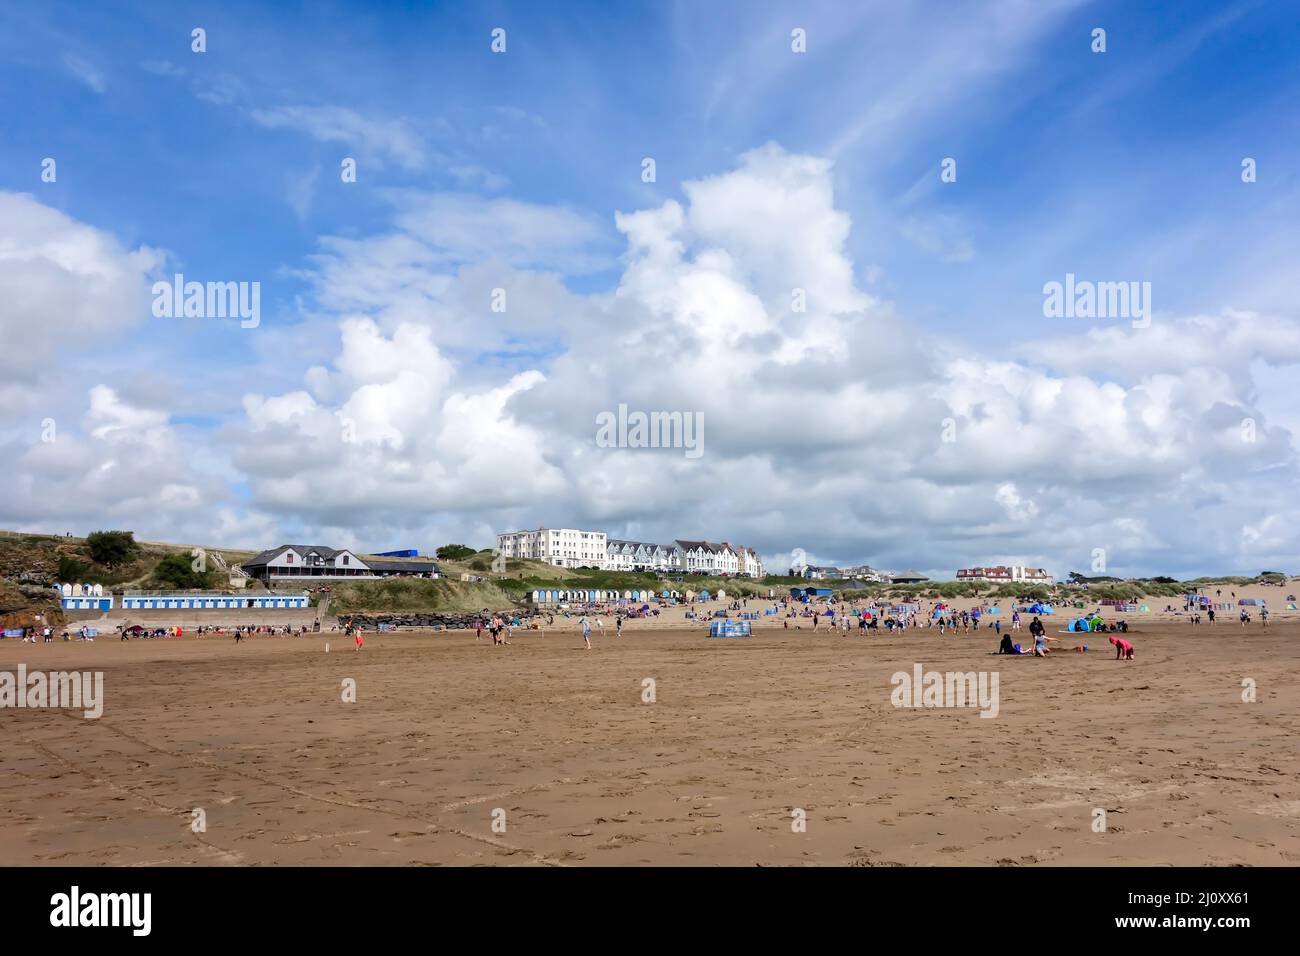 BUDE, CORNWALL/UK - AUGUST 12 : People Enjoying the Beach at Bude in Cornwall on August 12, 2013. Unidentified people Stock Photo